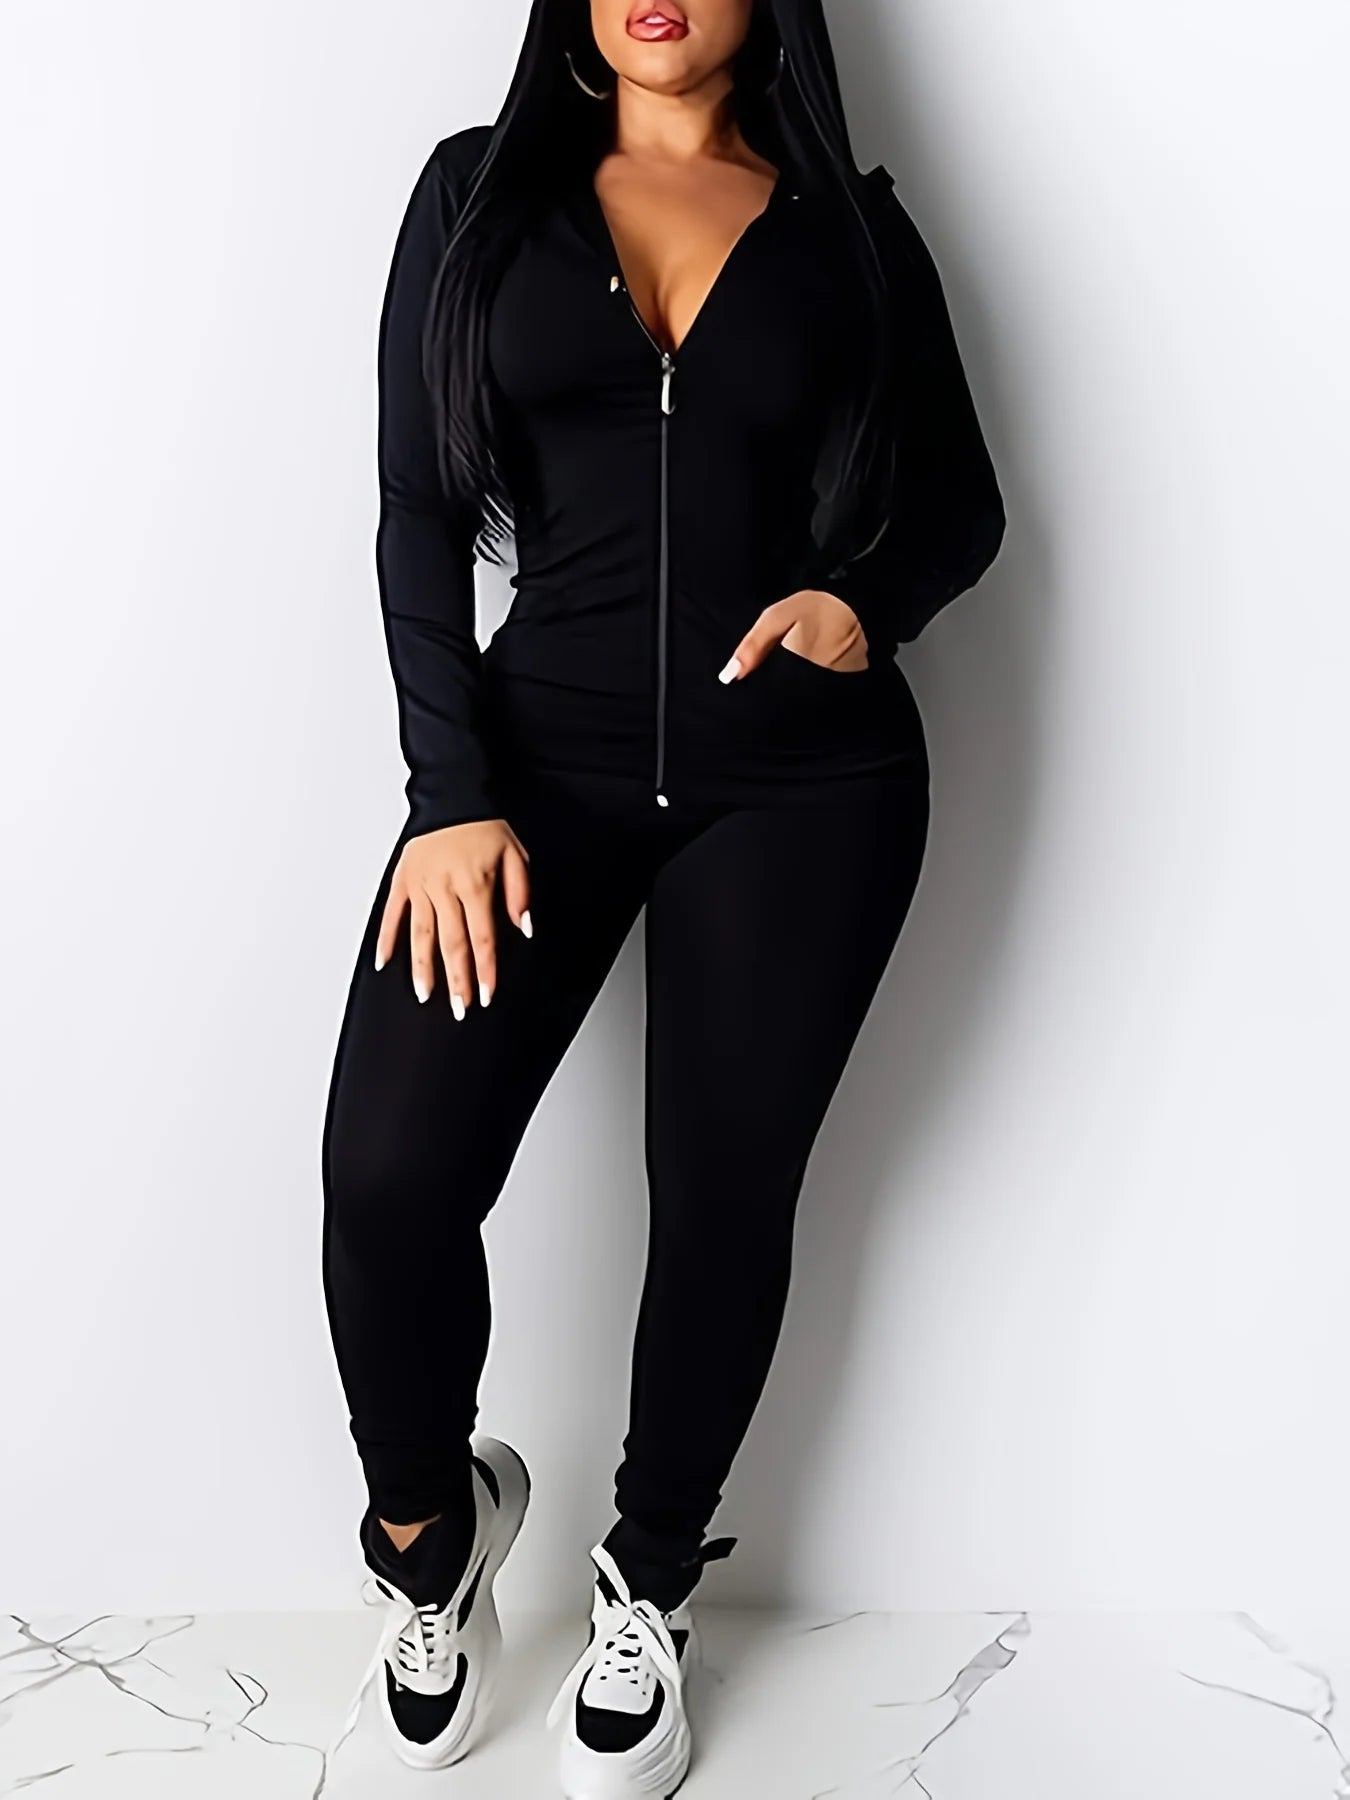 Women's fashion and leisure two-piece sportswear set, long sleeved zippered hooded jacket, sports pants, jogging and fitness set